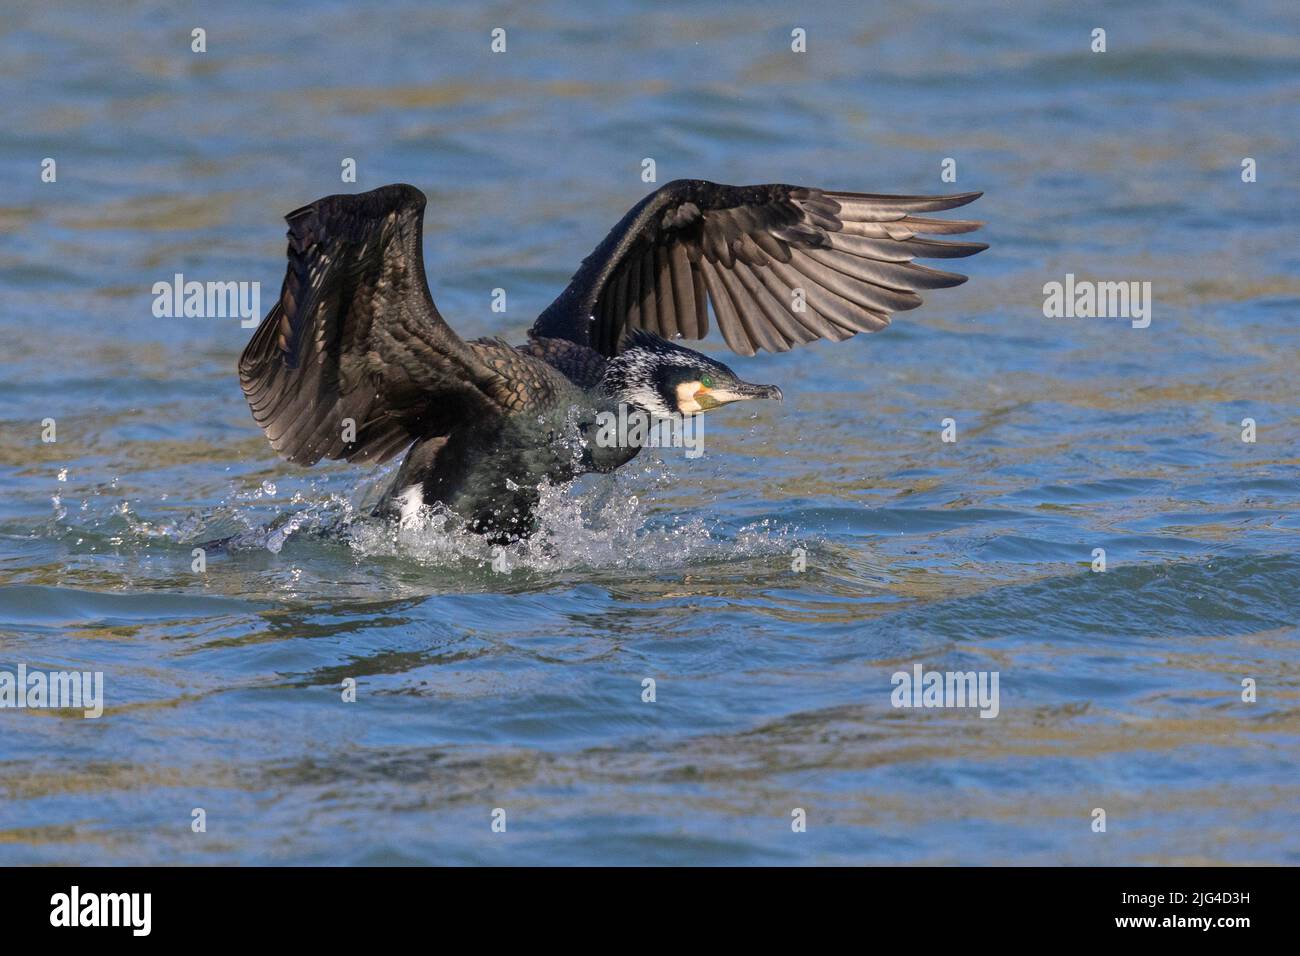 Great Cormorant (Phalacrocorax carbo sinensis), adult landing on the water, Campania, Italy Stock Photo